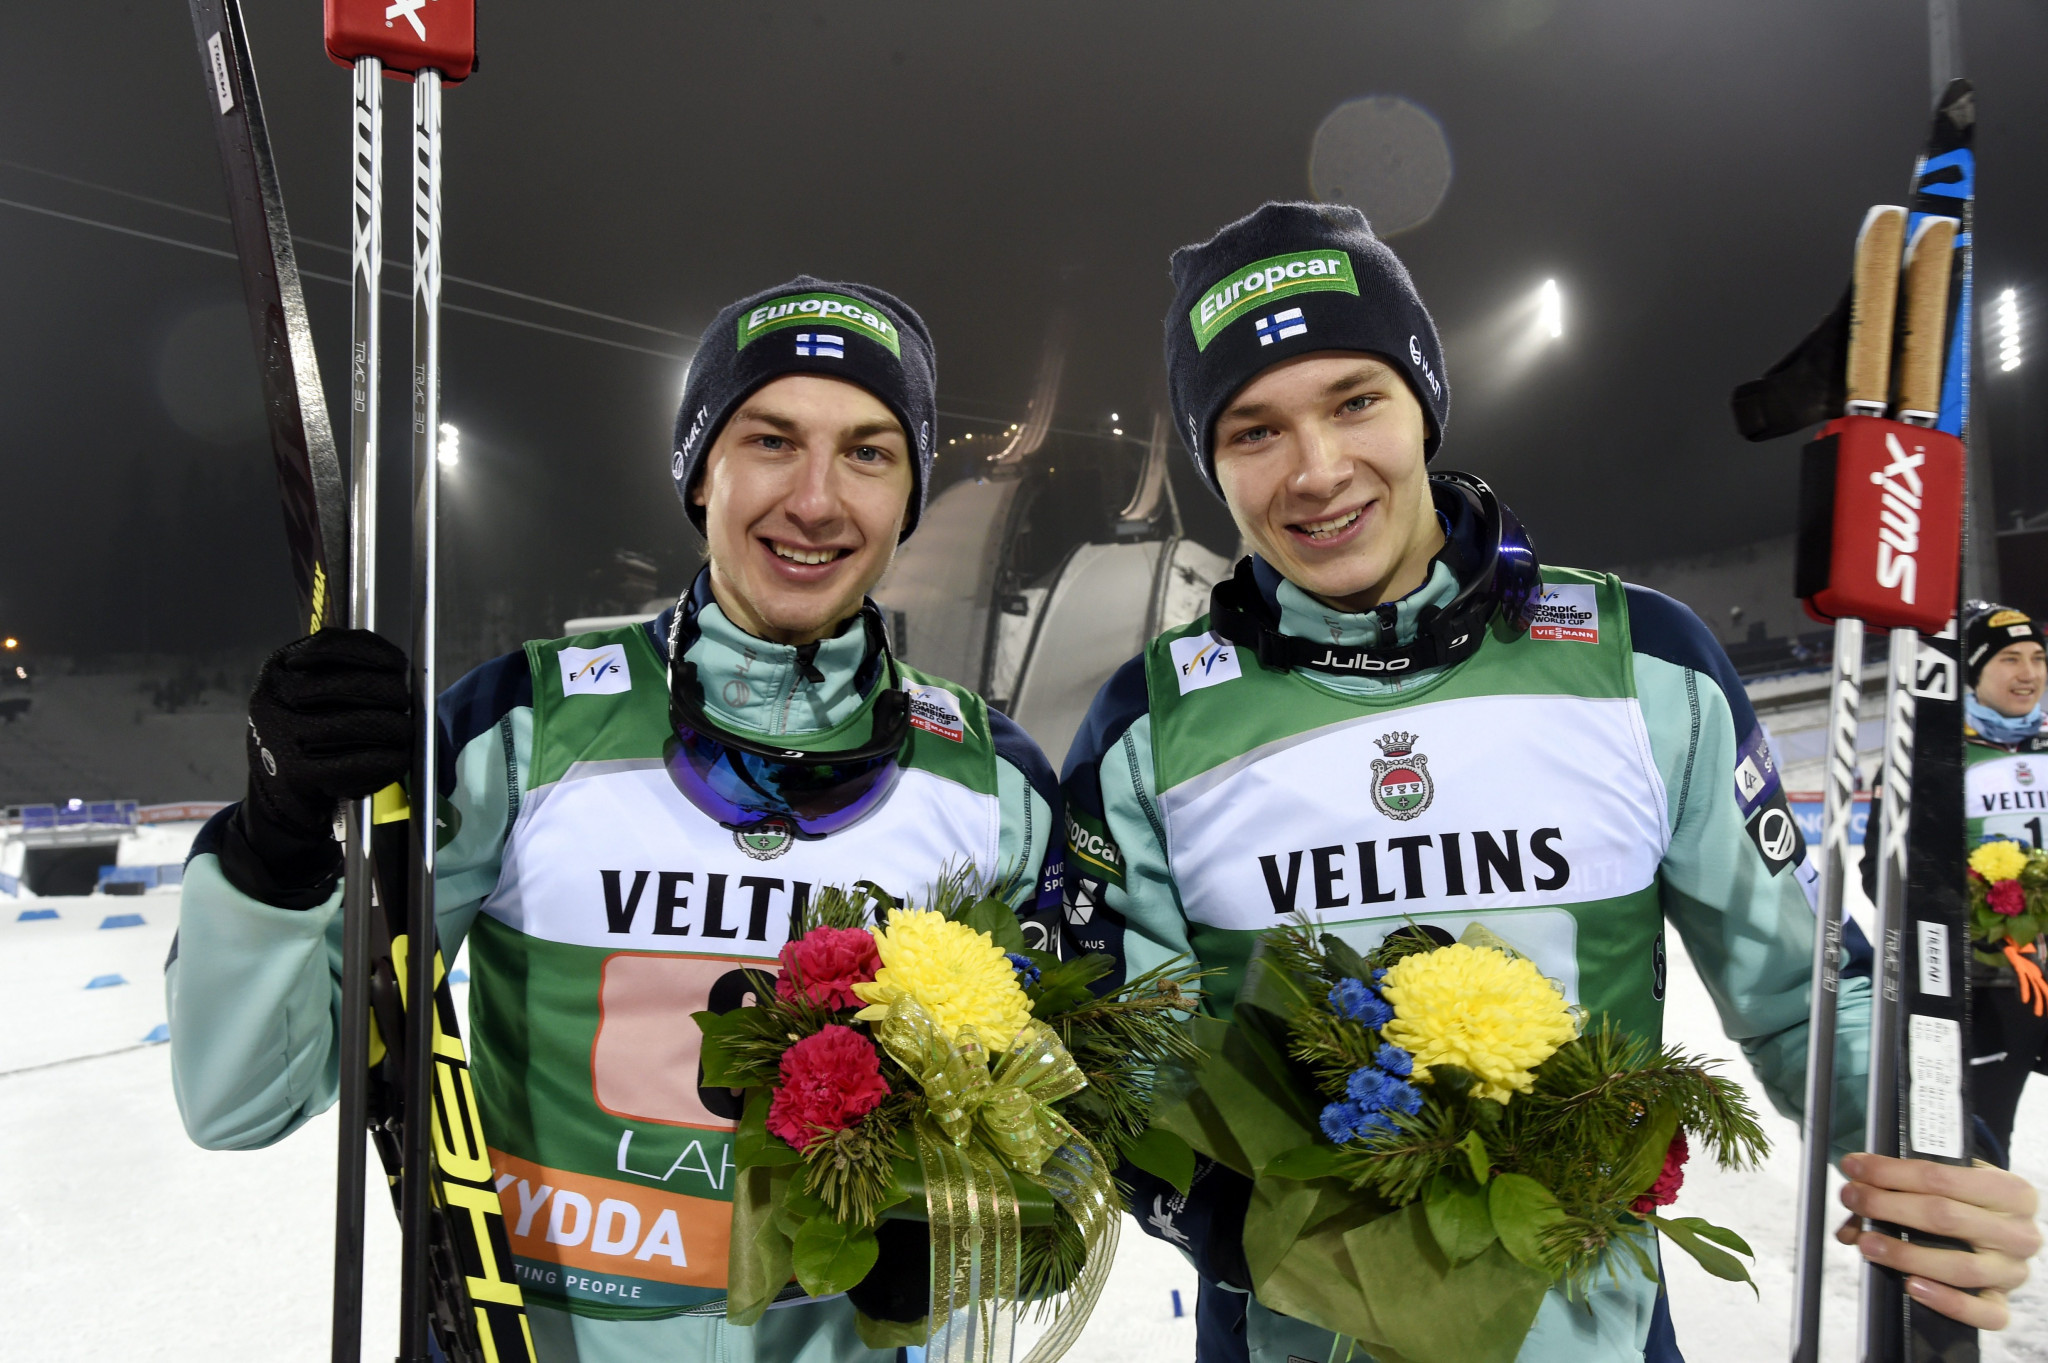 Finnish pairing celebrates team sprint success at FIS Nordic Combined World Cup in Lahti